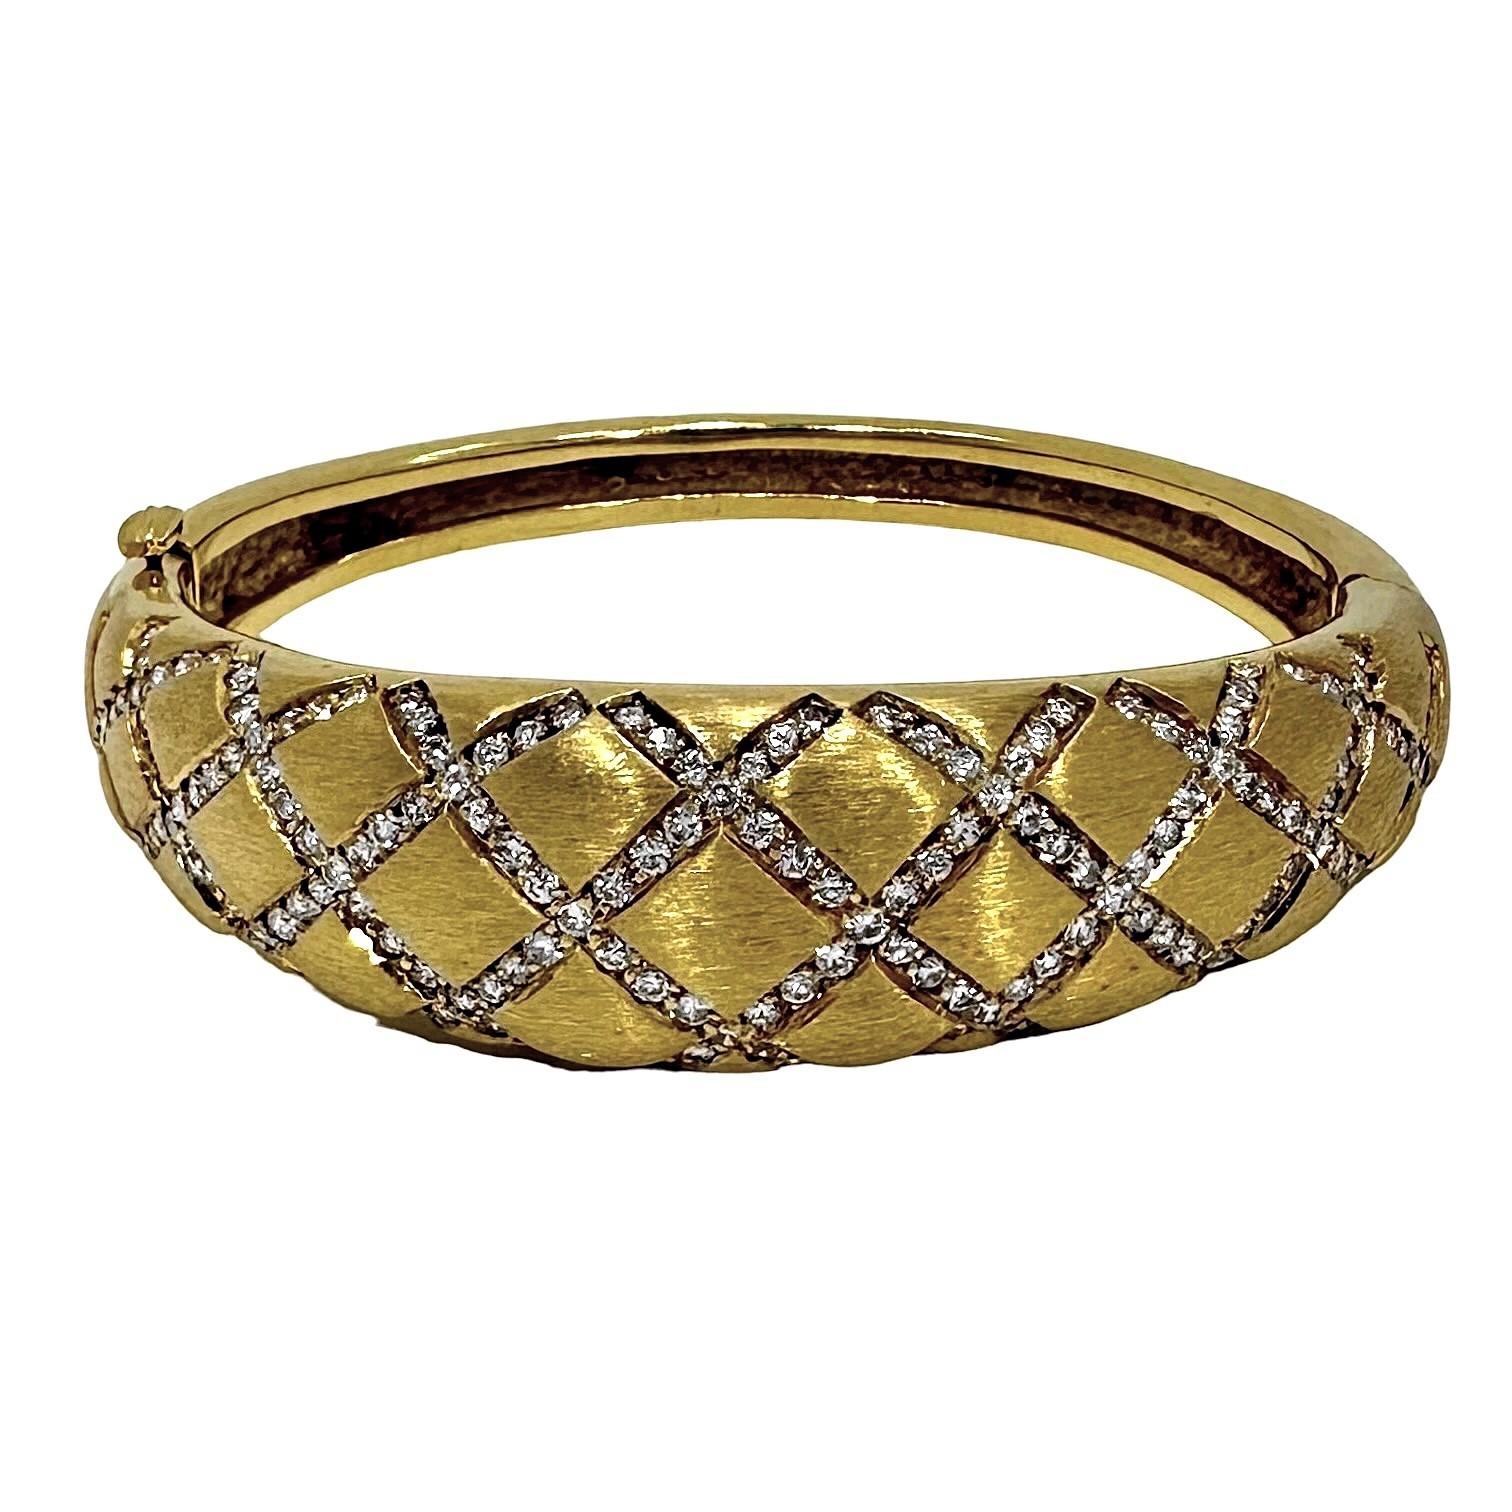 This striking and very substantial Late-20th Century creation by highly regarded designer Le Triomphe, is just as much in fashion today as it was many years ago when first introduced into the marketplace.  The bracelet in no way presents as